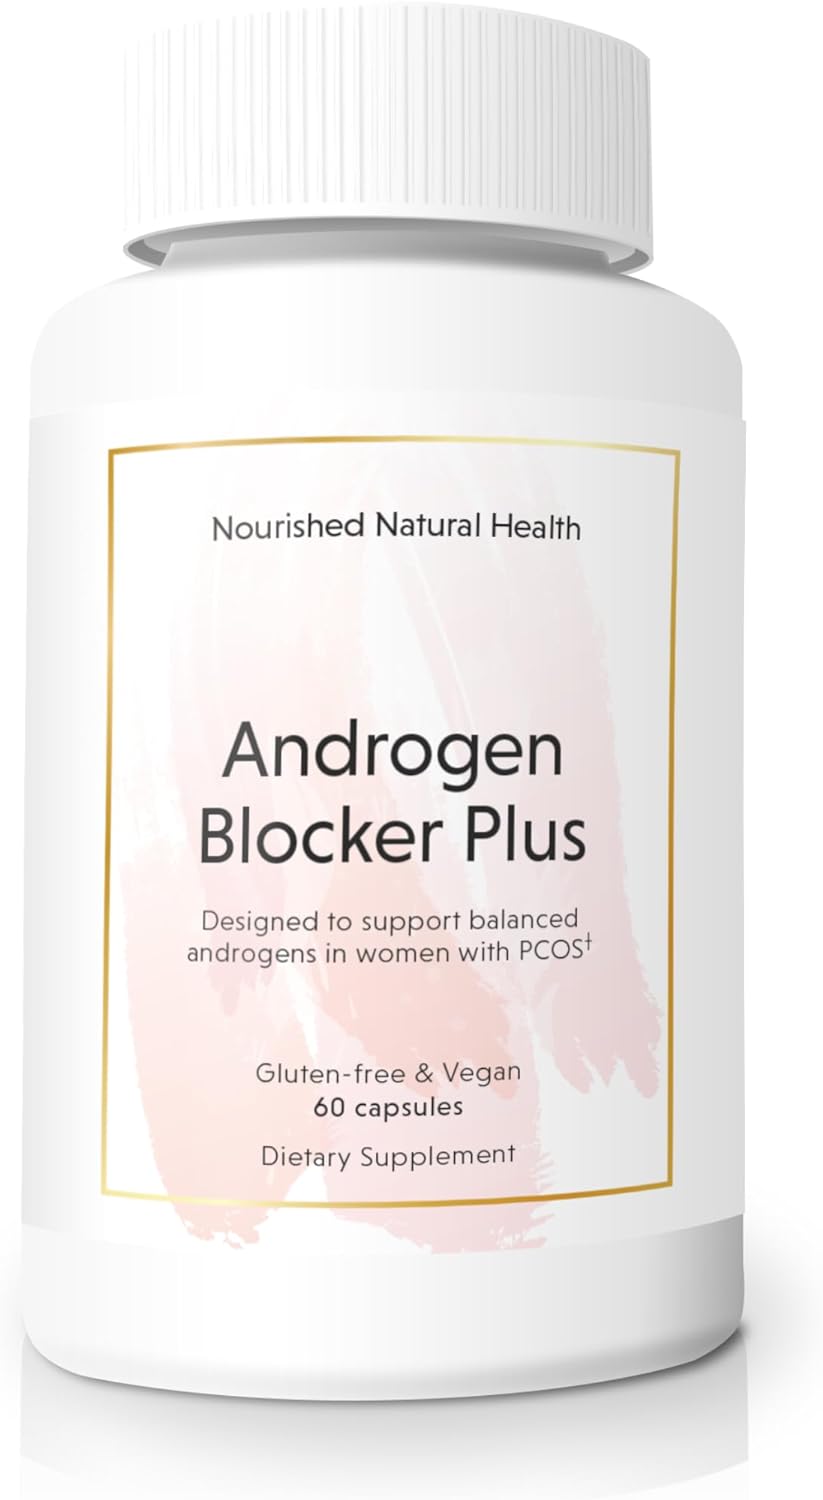 Nourished Naturals Androgen Blocker Plus for PCOS - Hormone Balance Supplement for Women with Zinc  Saw Palmetto - Reduce Facial Hair, Weight Loss, Fertility Symptoms (1 Bottle)